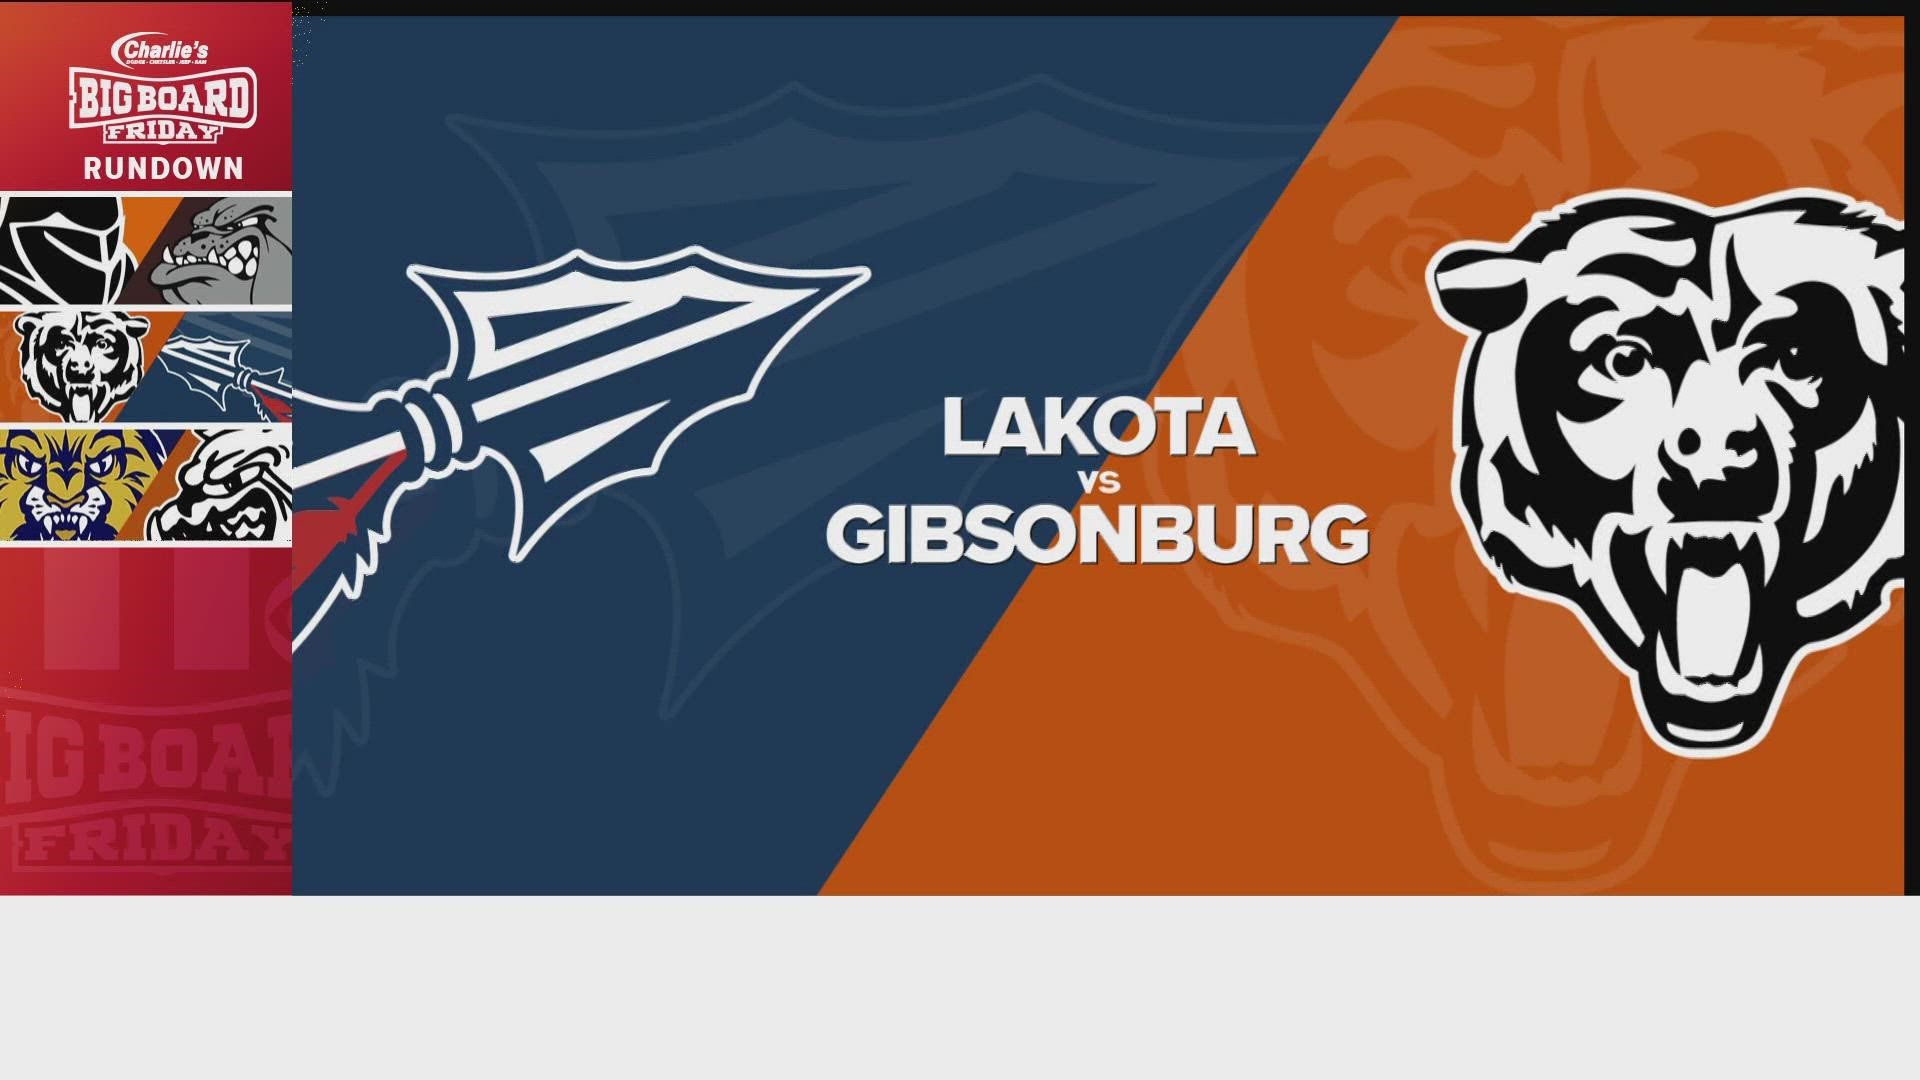 Gibsonburg gets it done on the ground against Lakota. They win it 44-7.